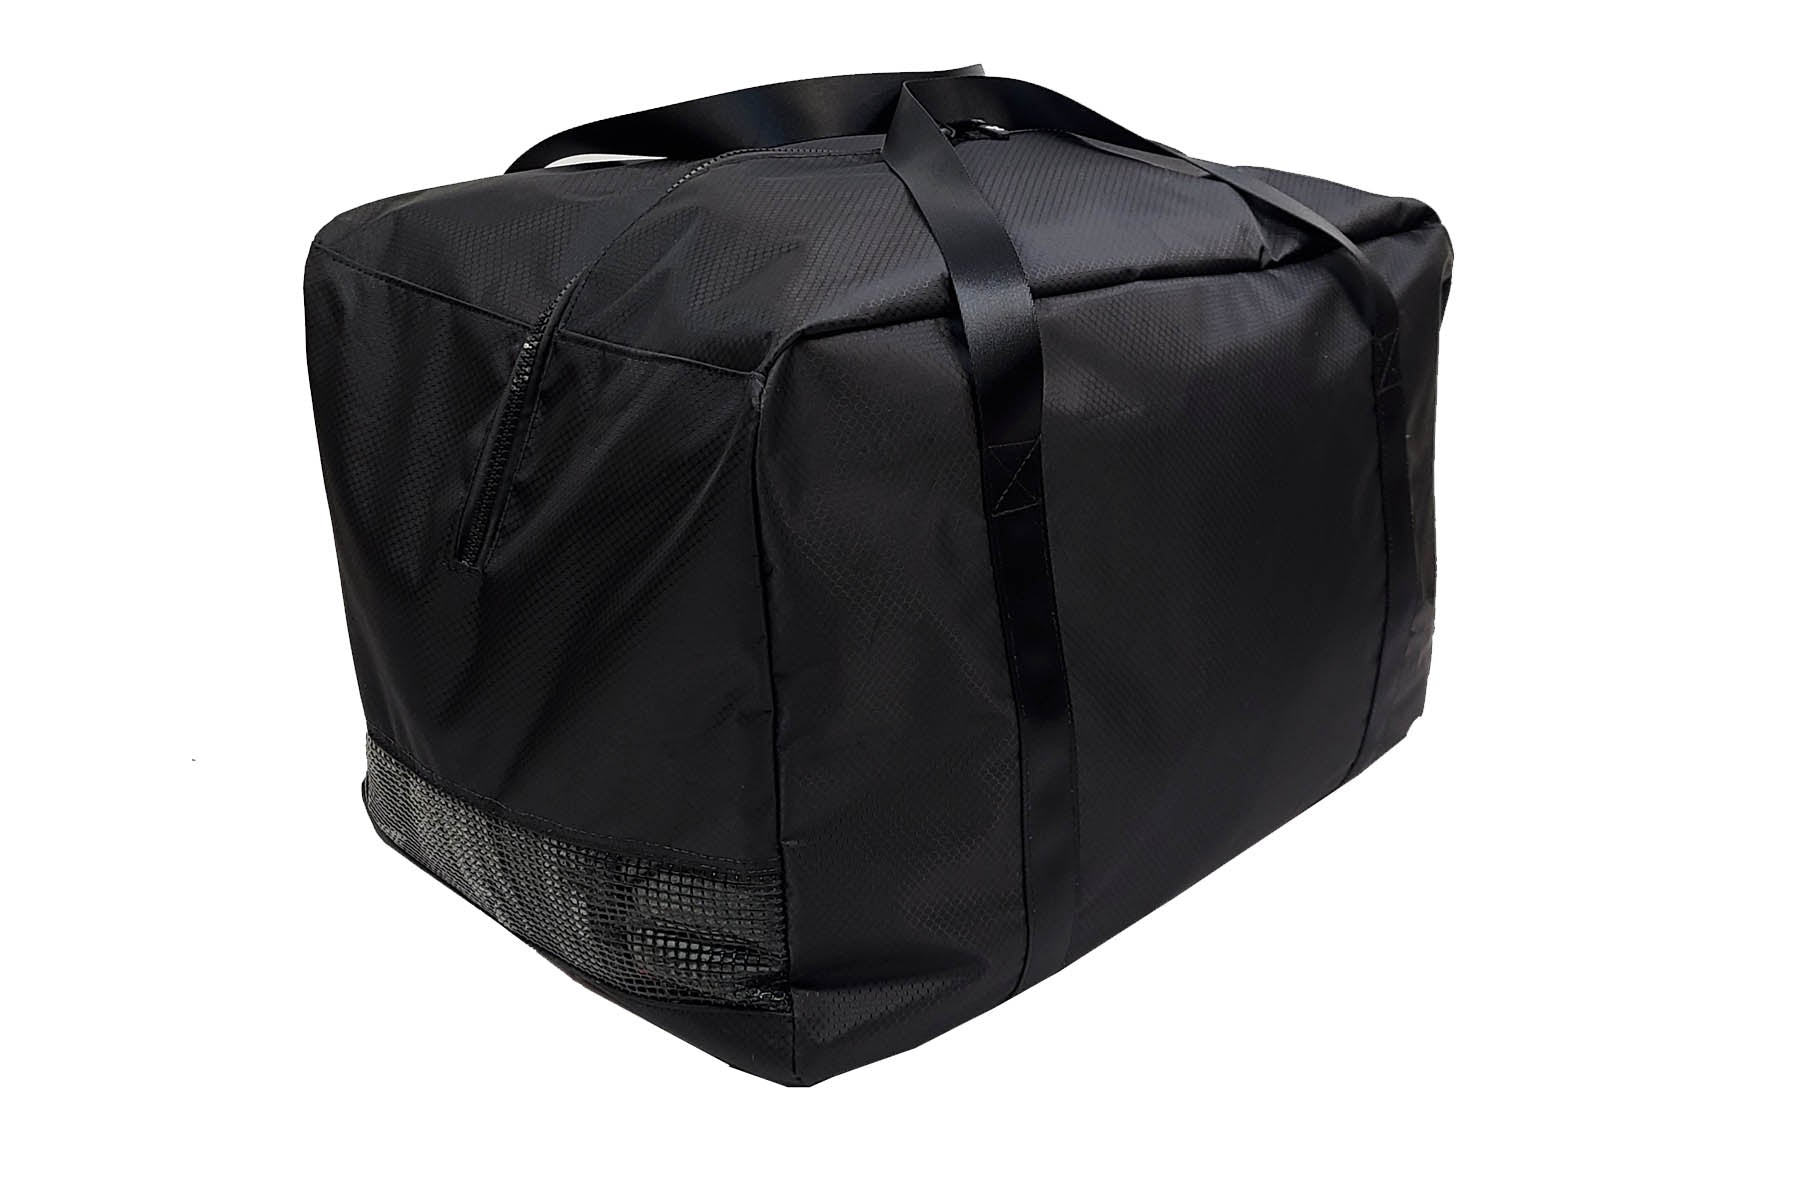 Factory Boat Cover Bag